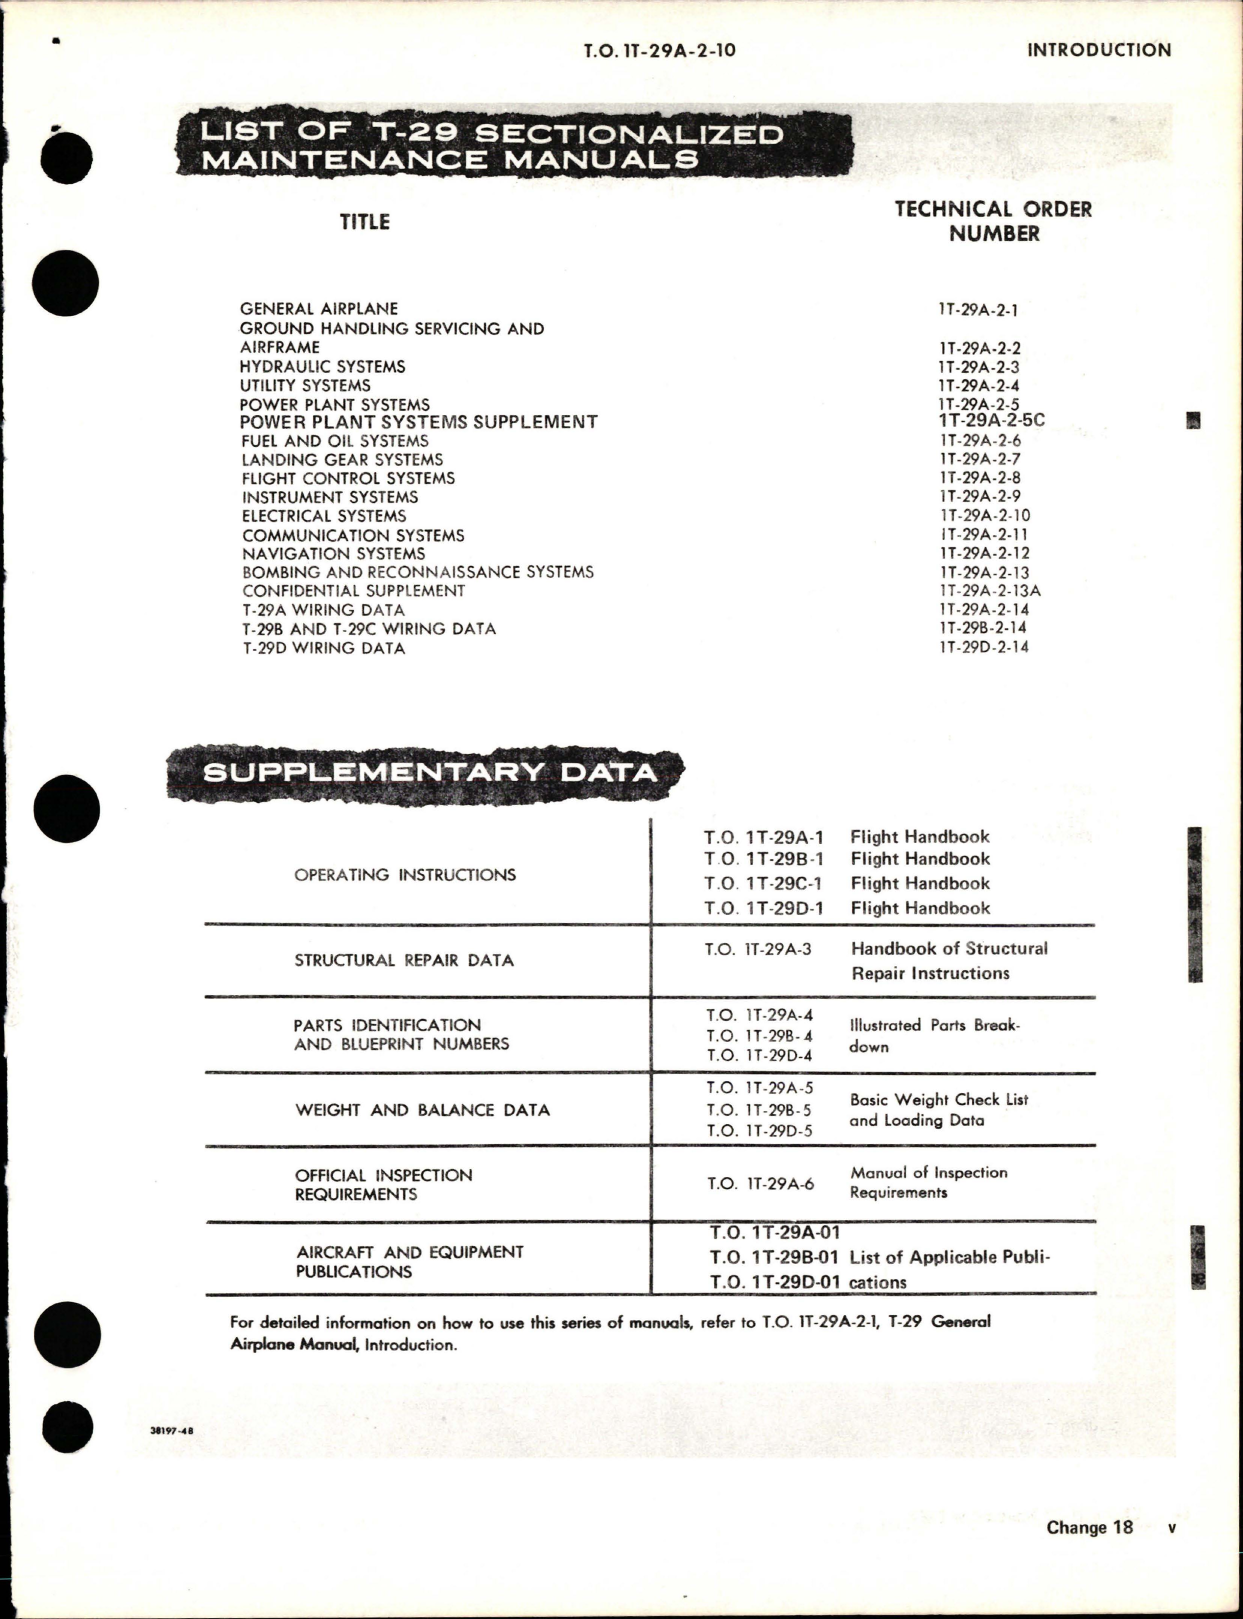 Sample page 9 from AirCorps Library document: Maintenance for Electrical Systems - T-29A, T-29B, T-29C and T-29D